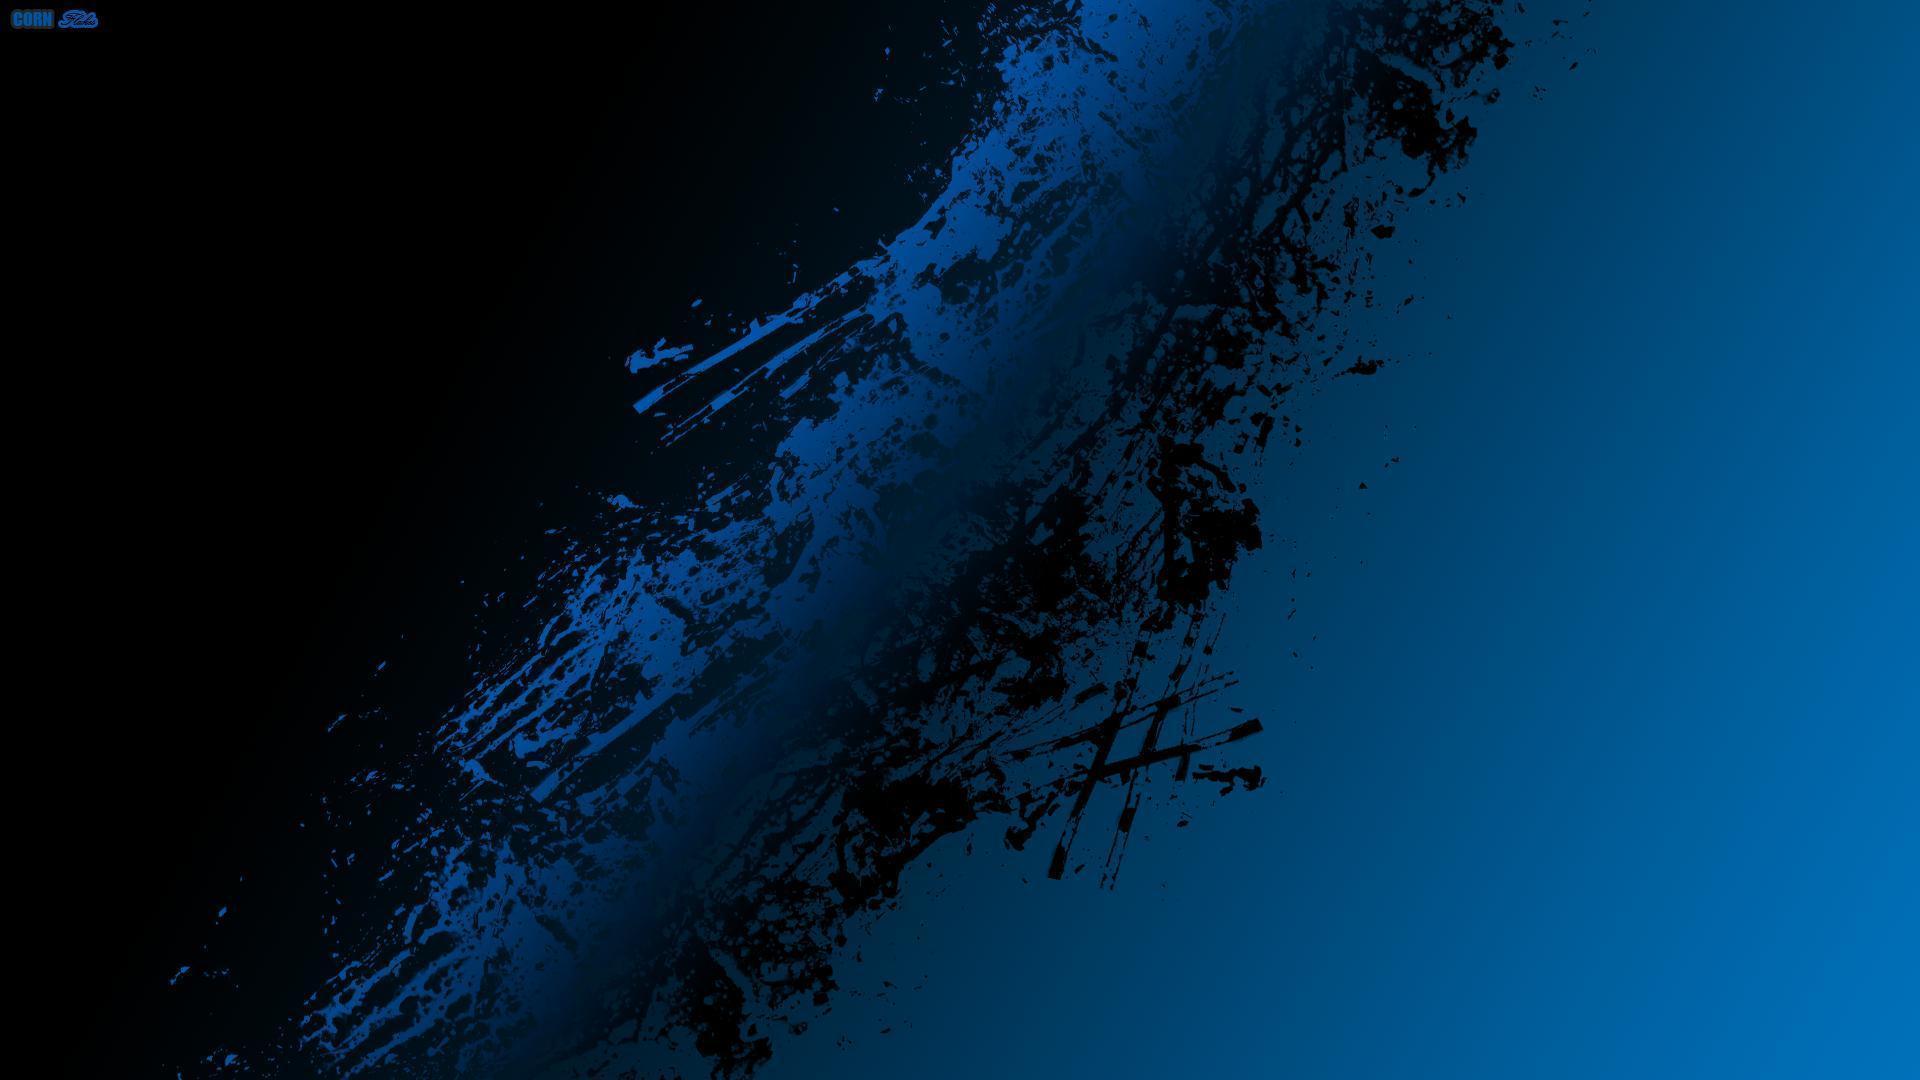 Black Blue Abstract Wallpaper Hq Picture 13 HD Wallpaper. lzamgs